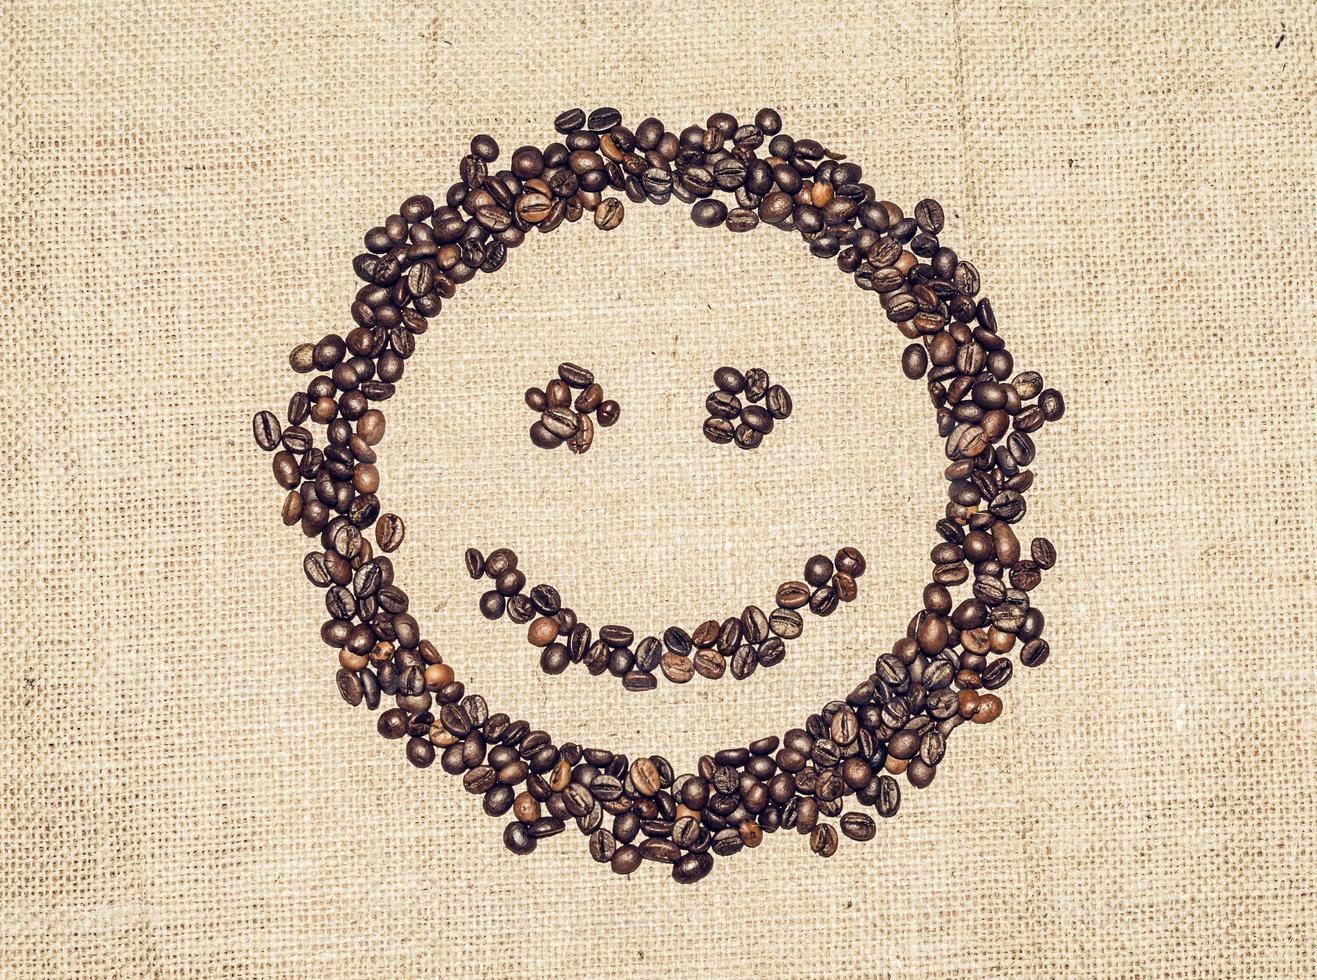 smiling face formed by coffee grains on coarse cloth photo